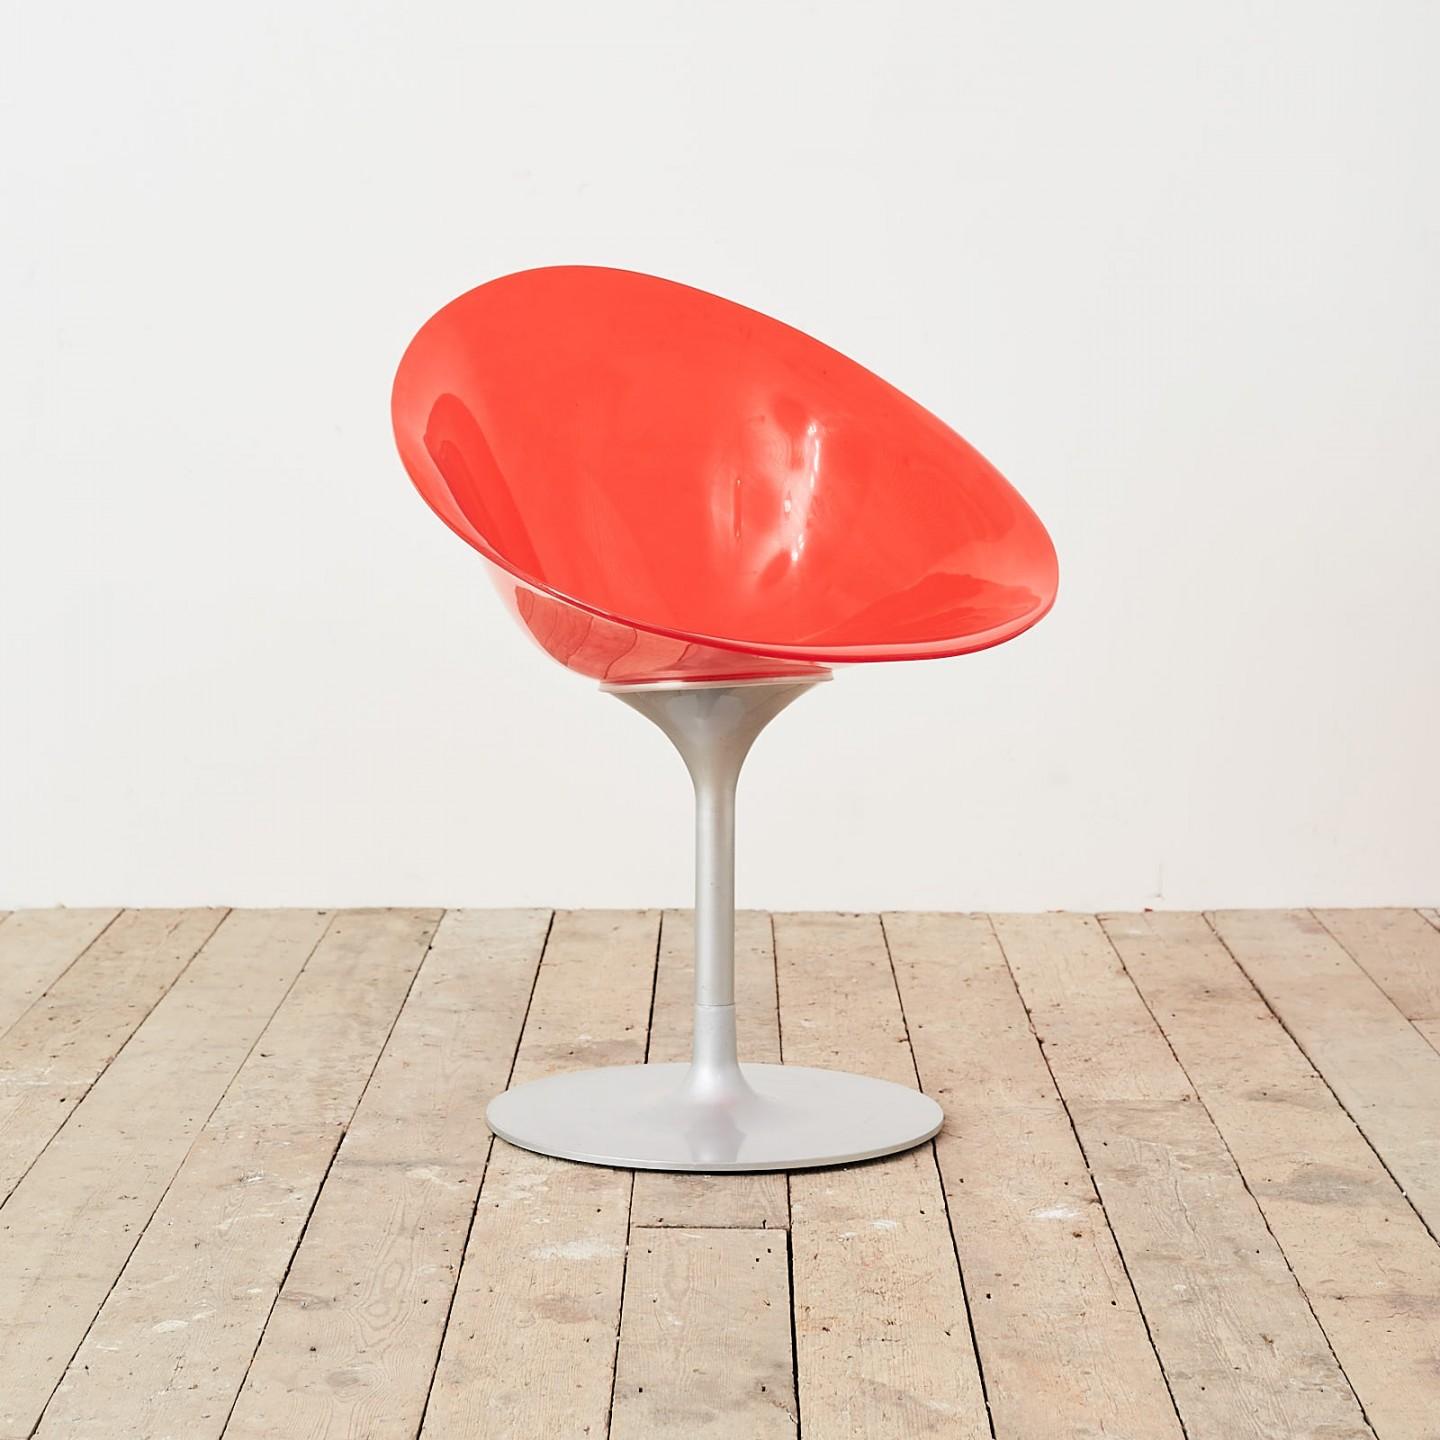 A Kartell Eros chair by Philippe Starck. Red Lucite with swivel base.